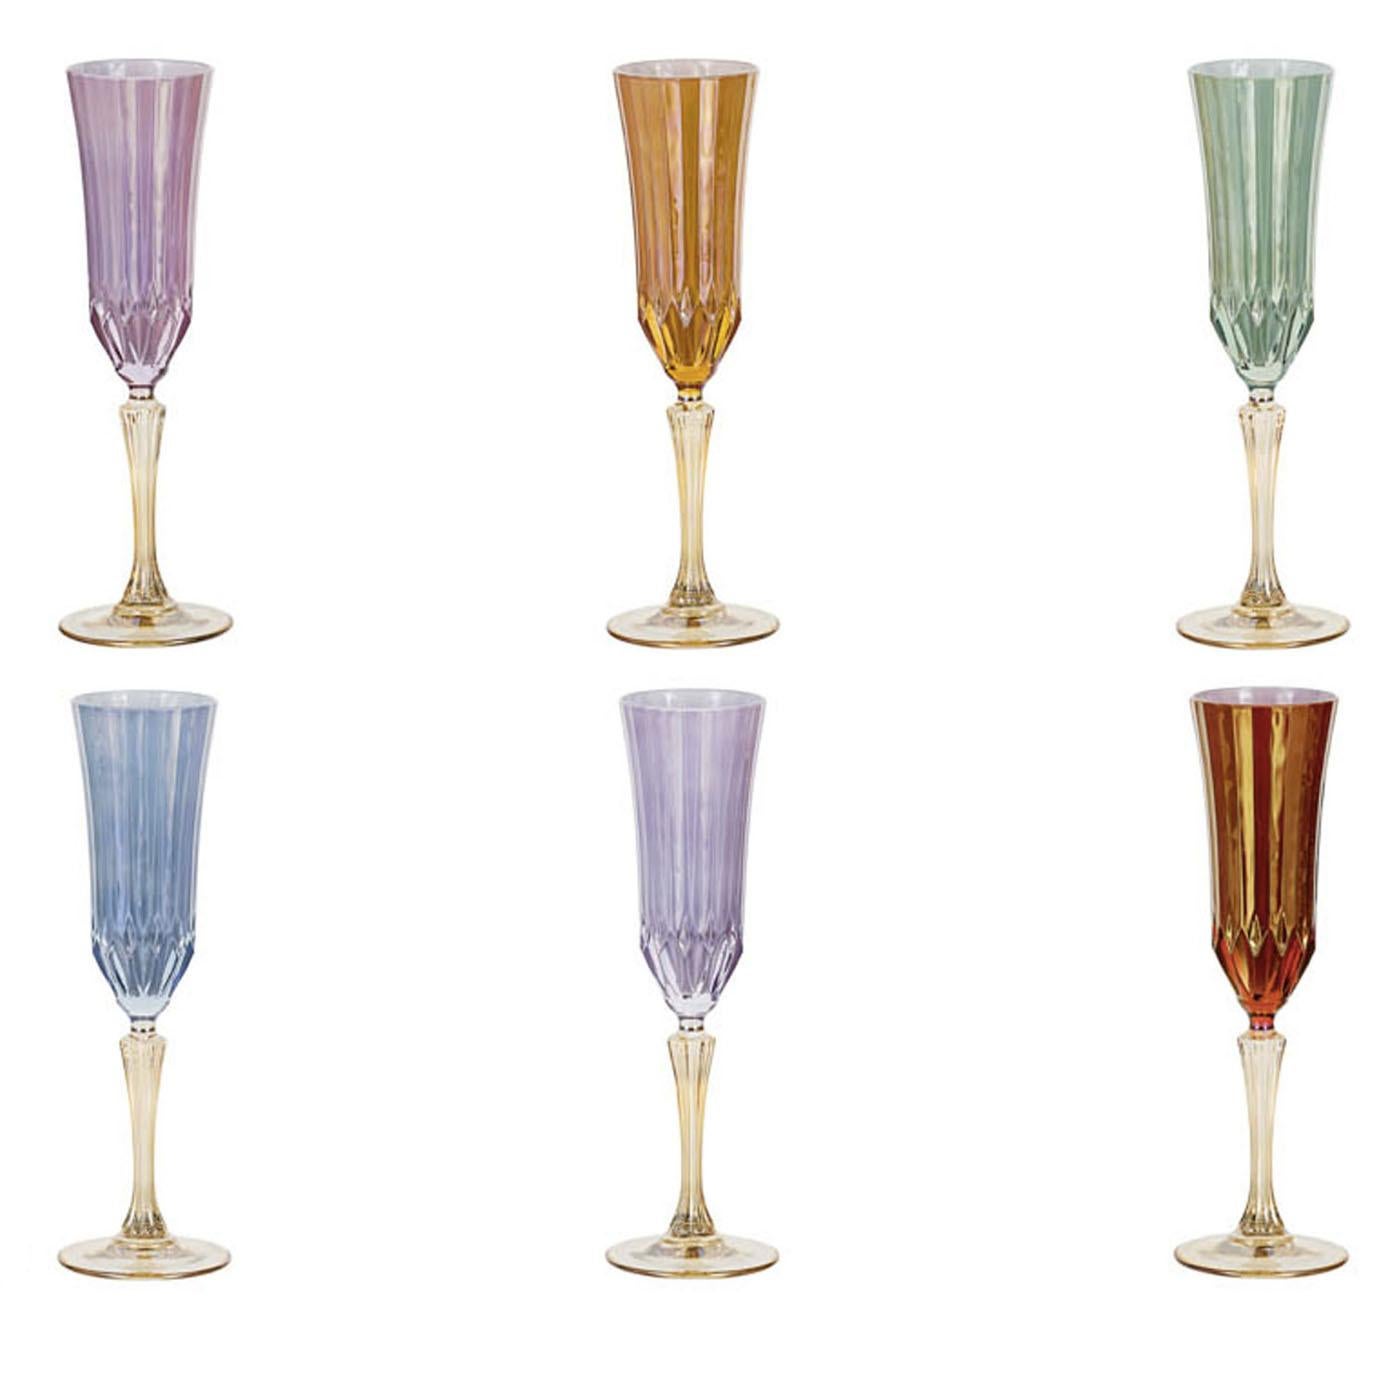 This luxurious set of 6 18cl chalices are fit for royalty. They come in 6 vivid transparent colors and are made to hold champagne or any other drink of your choice. Each glass is handmade.